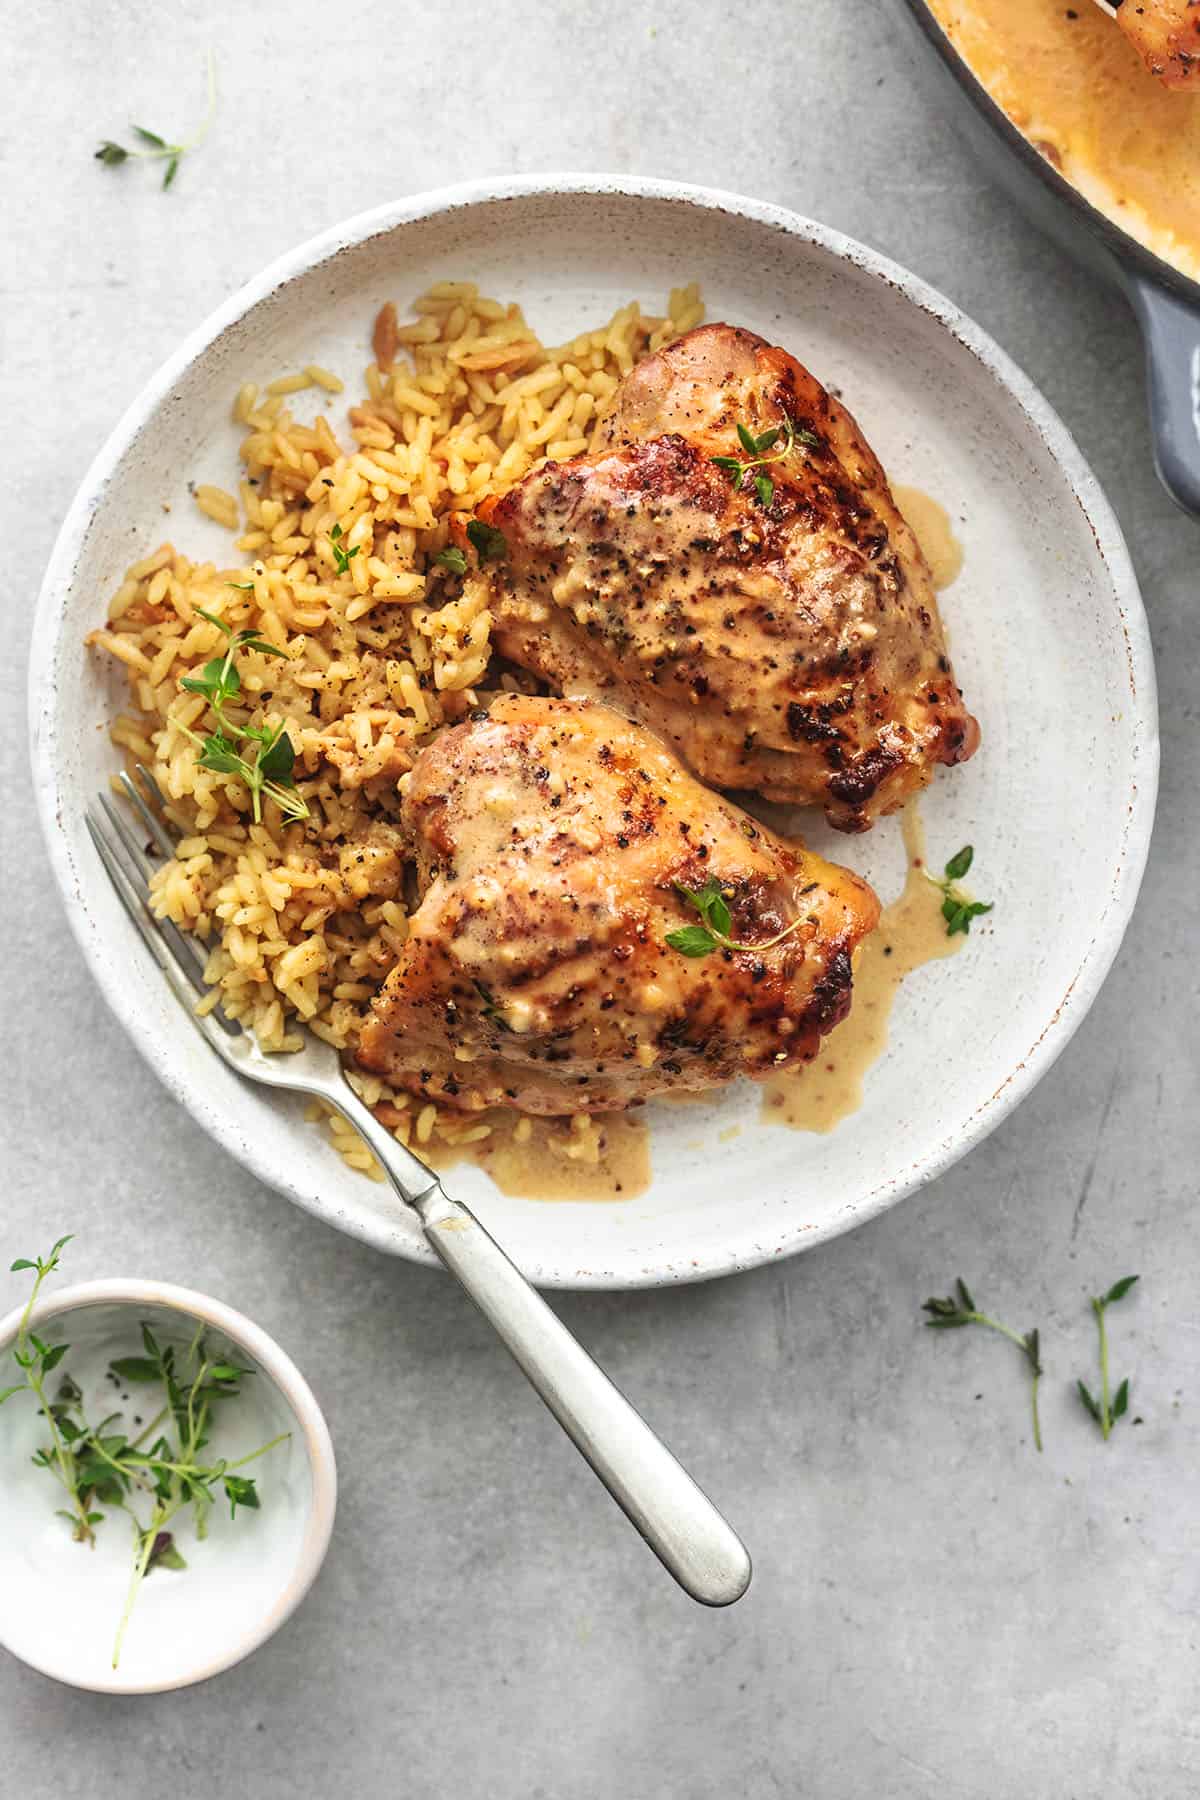 chicken thighs with sauce and rice on plate with bowl of herbs beside